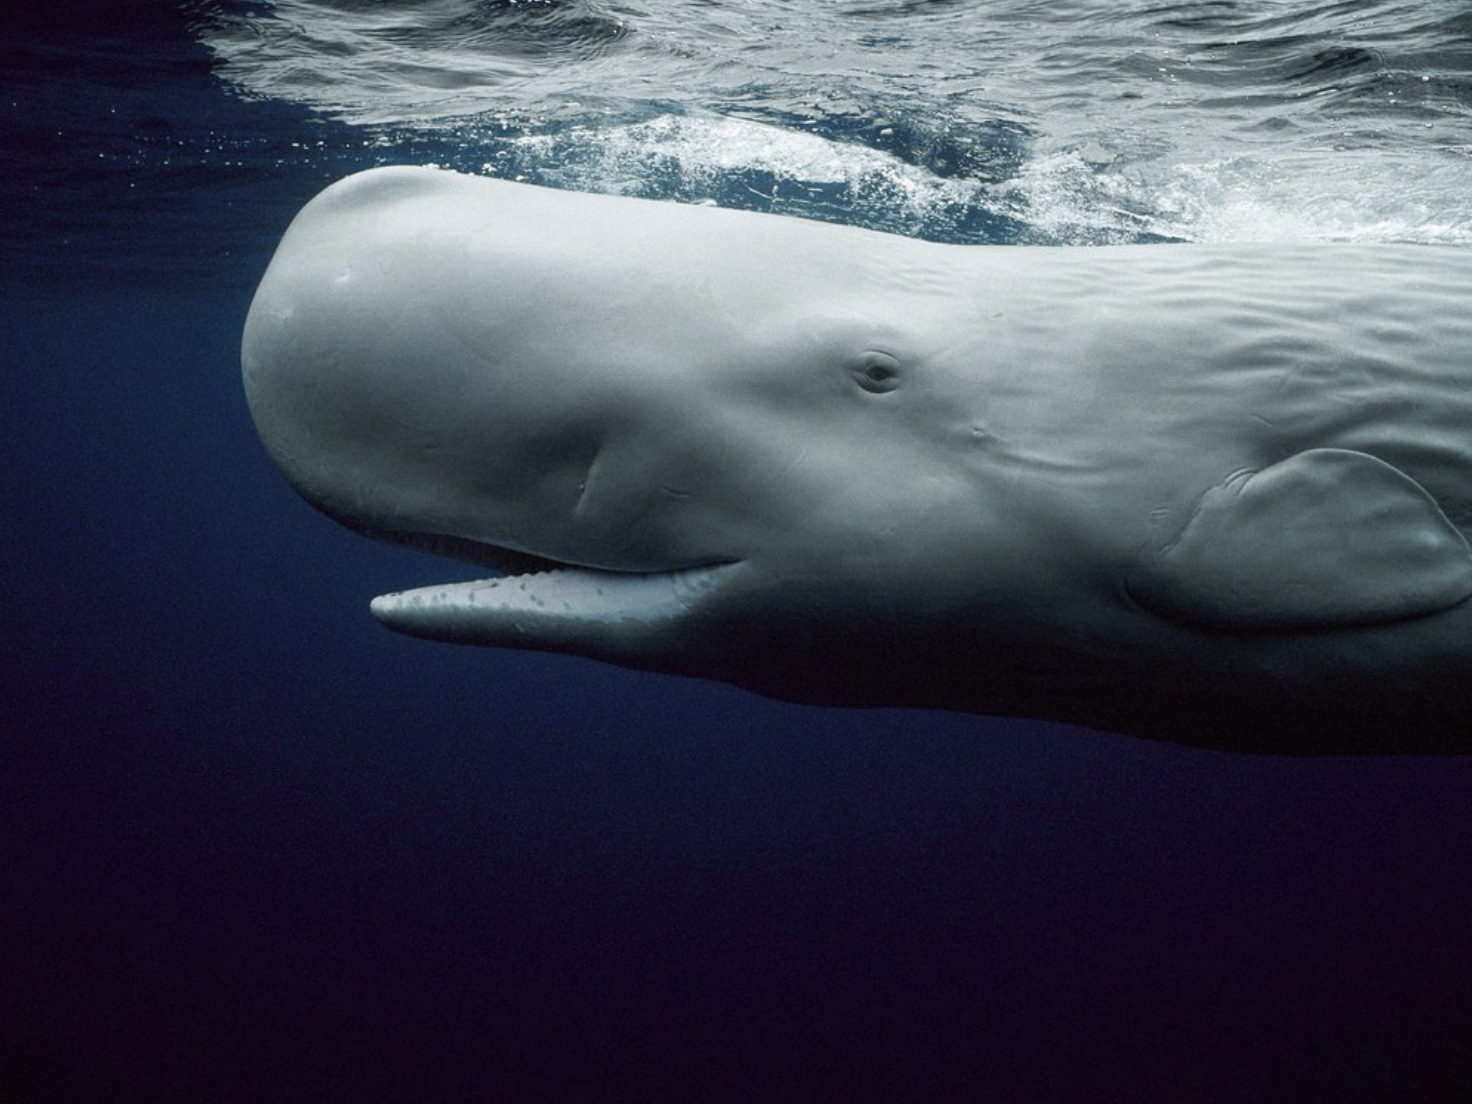 A sperm whale, the species that migrates though the seascape around Dominica.